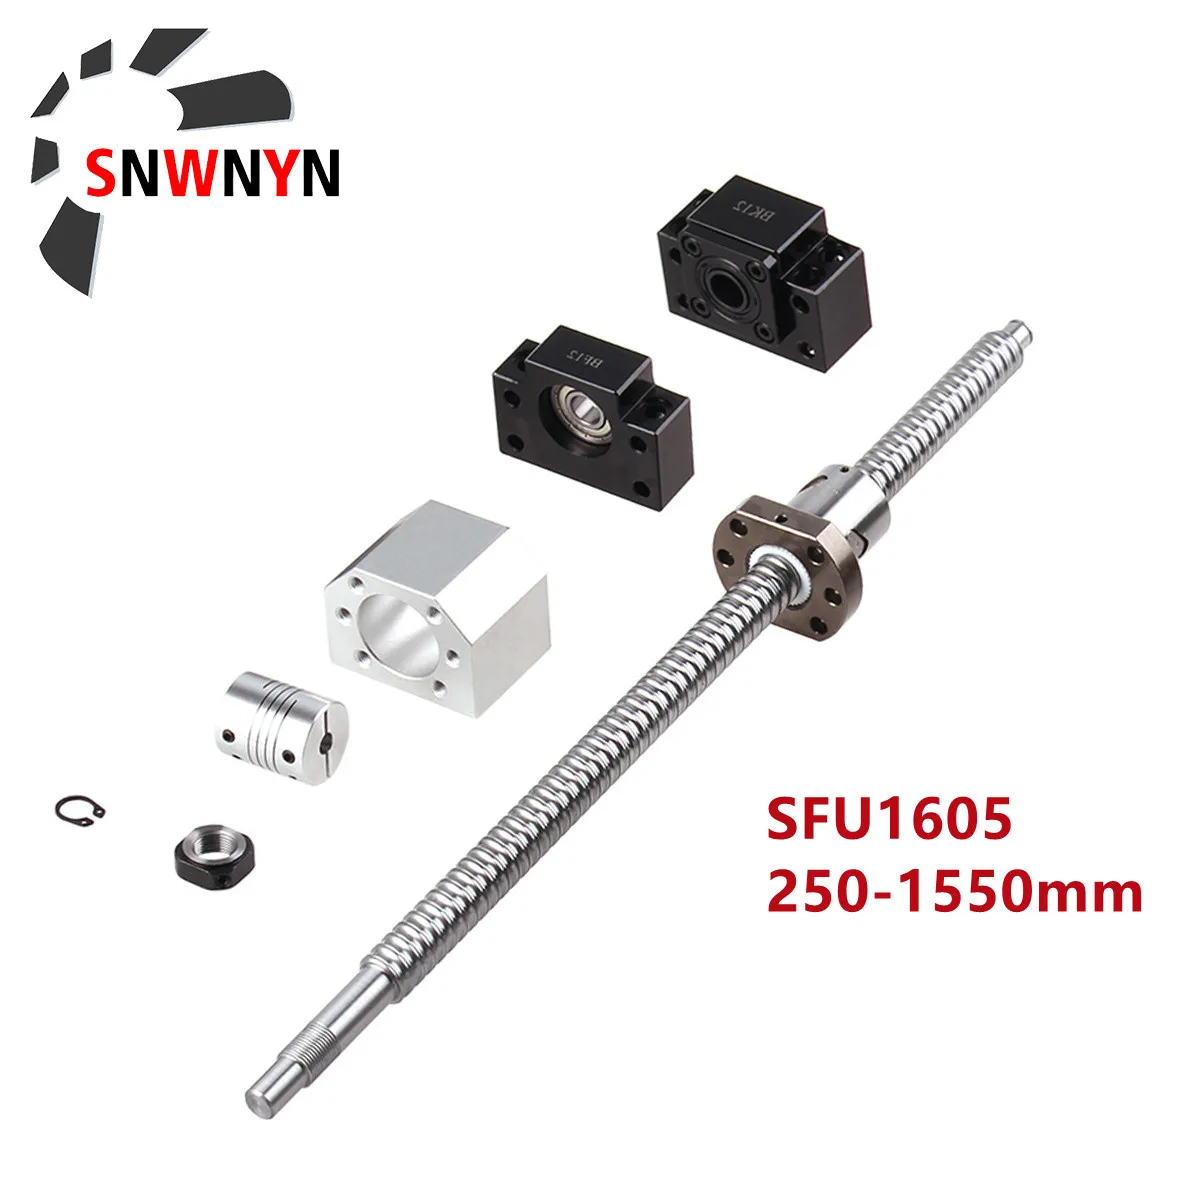 RM1605-1000mm ballscrew with Ballnut housing & coupler and BK/BF12 For CNC 